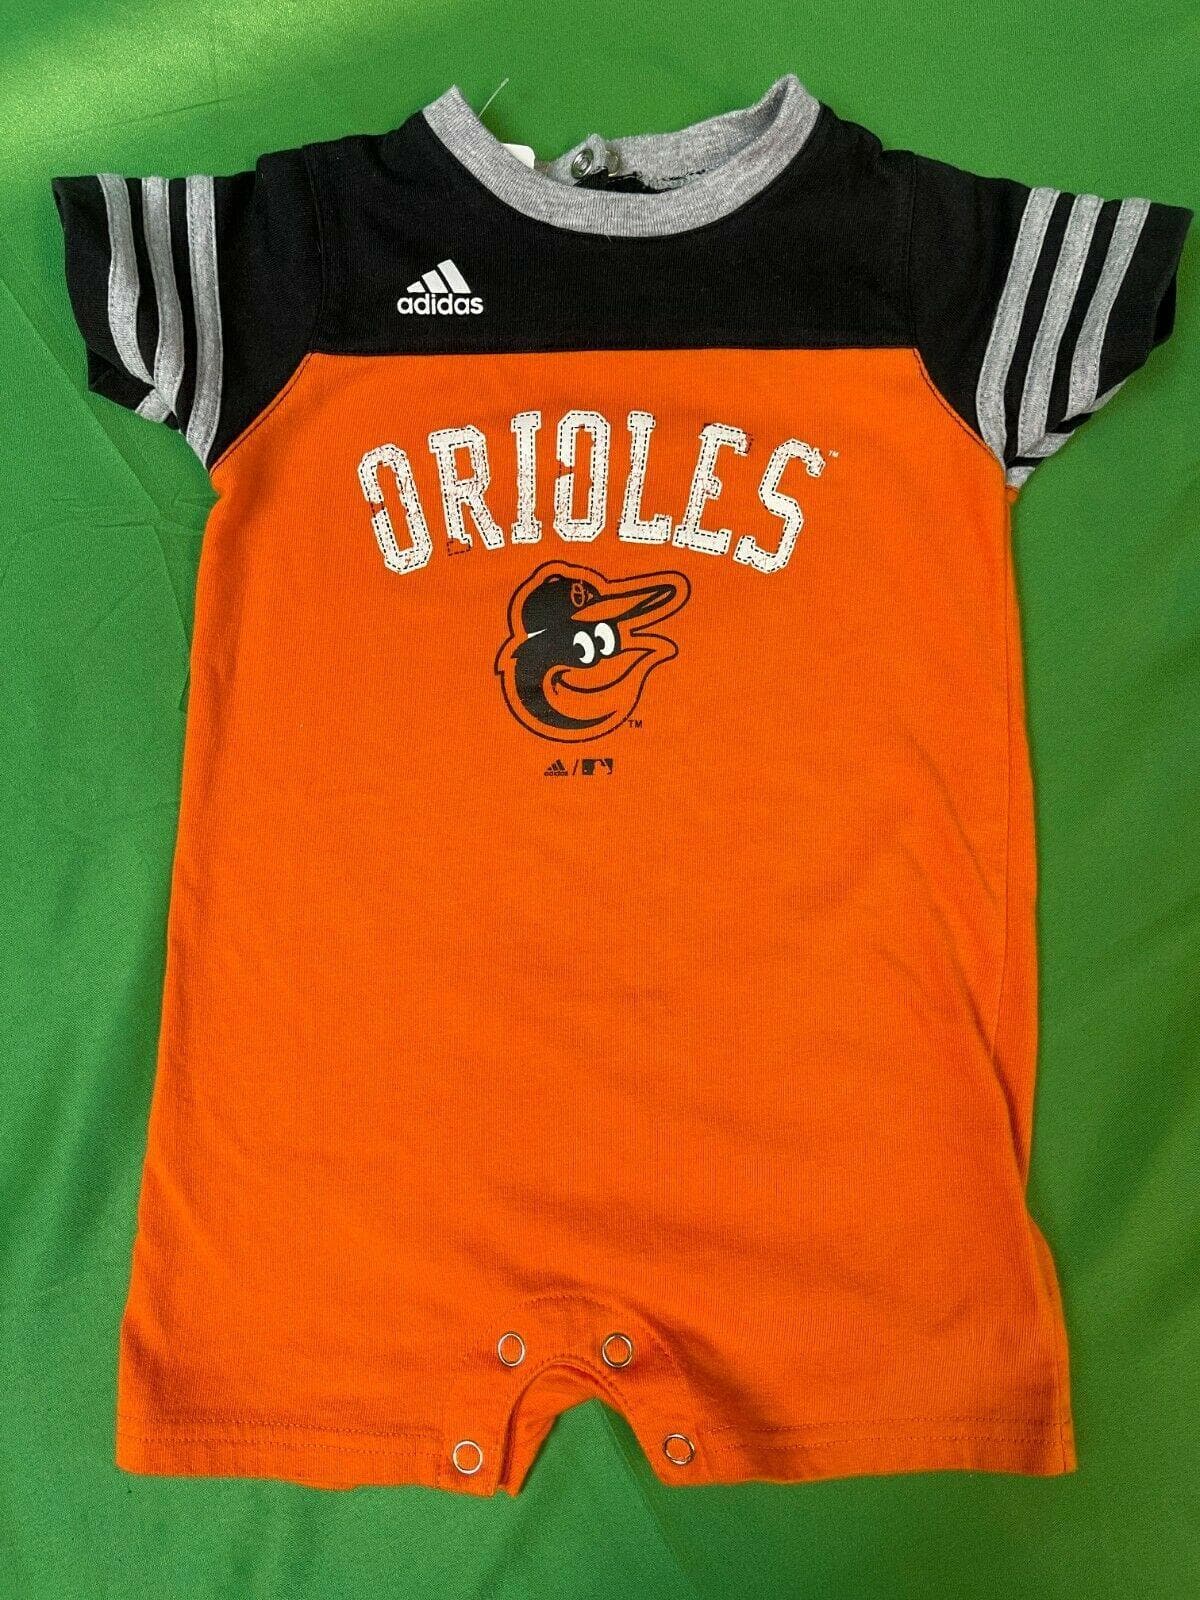 MLB Baltimore Orioles Adidas Play Outfit Toddler 24 months